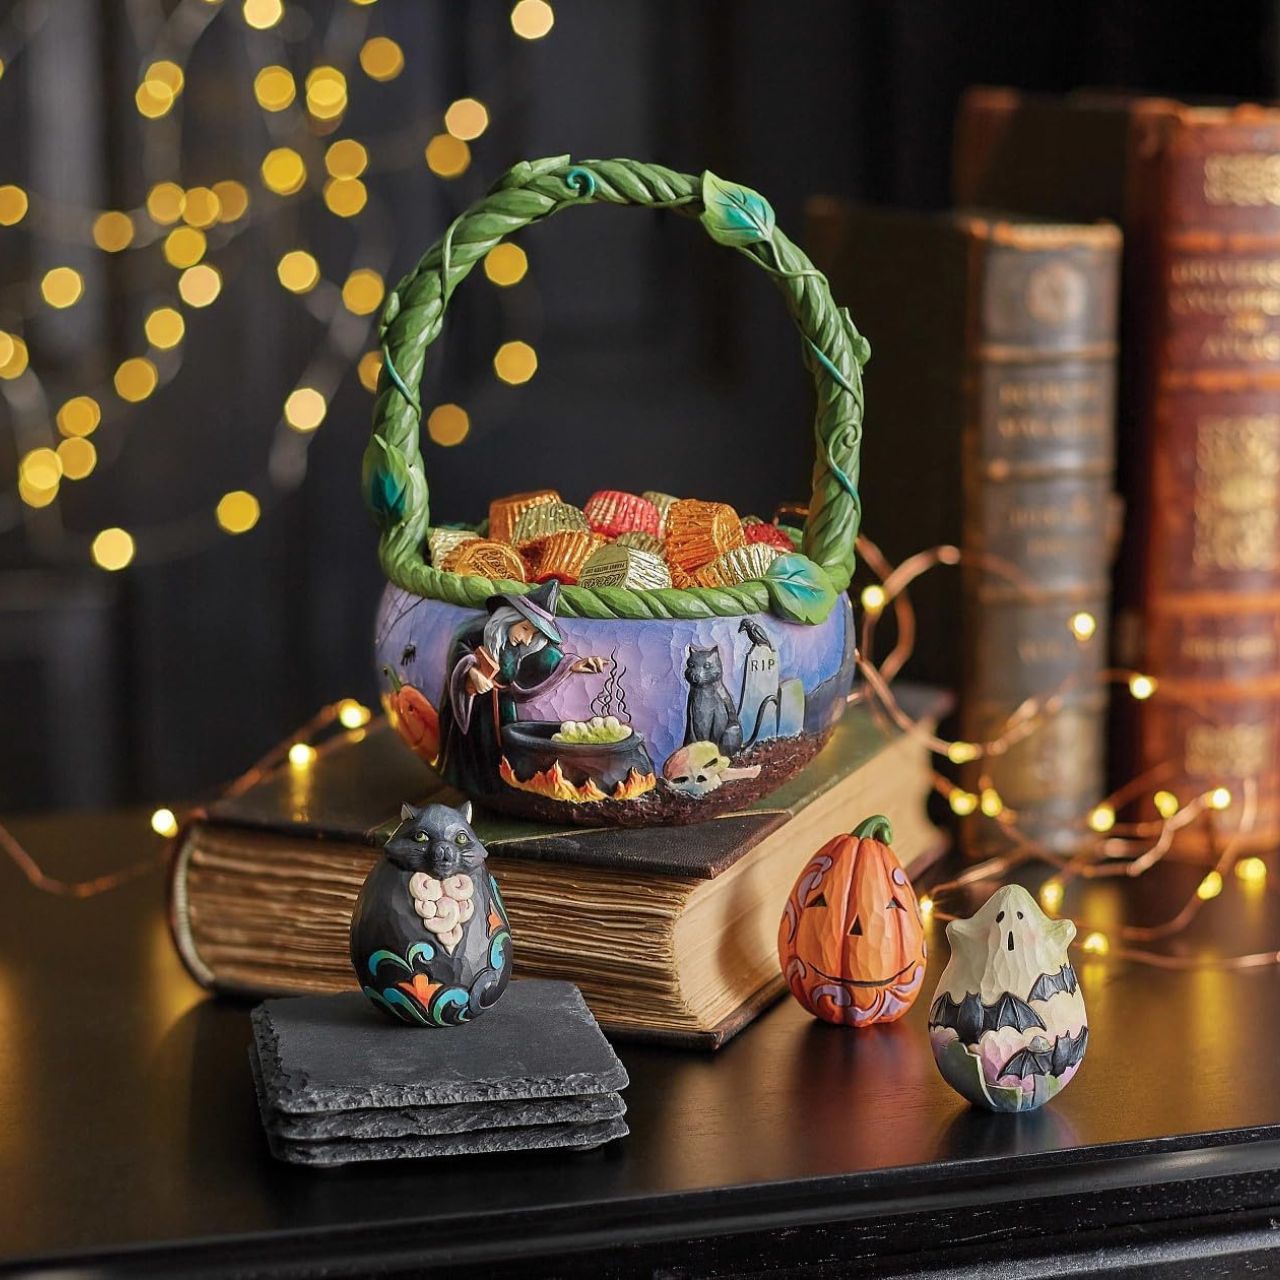 Heartwood Creek Halloween Basket Figurine  Beautifully hand-painted and crafted from high-quality stone resin with intricate styling and attention to detail. This intricate Jim Shore Halloween basket features two spooky sides. A witch brews a potion in a graveyard on one half while a Jack-o-lantern smiles on the other.